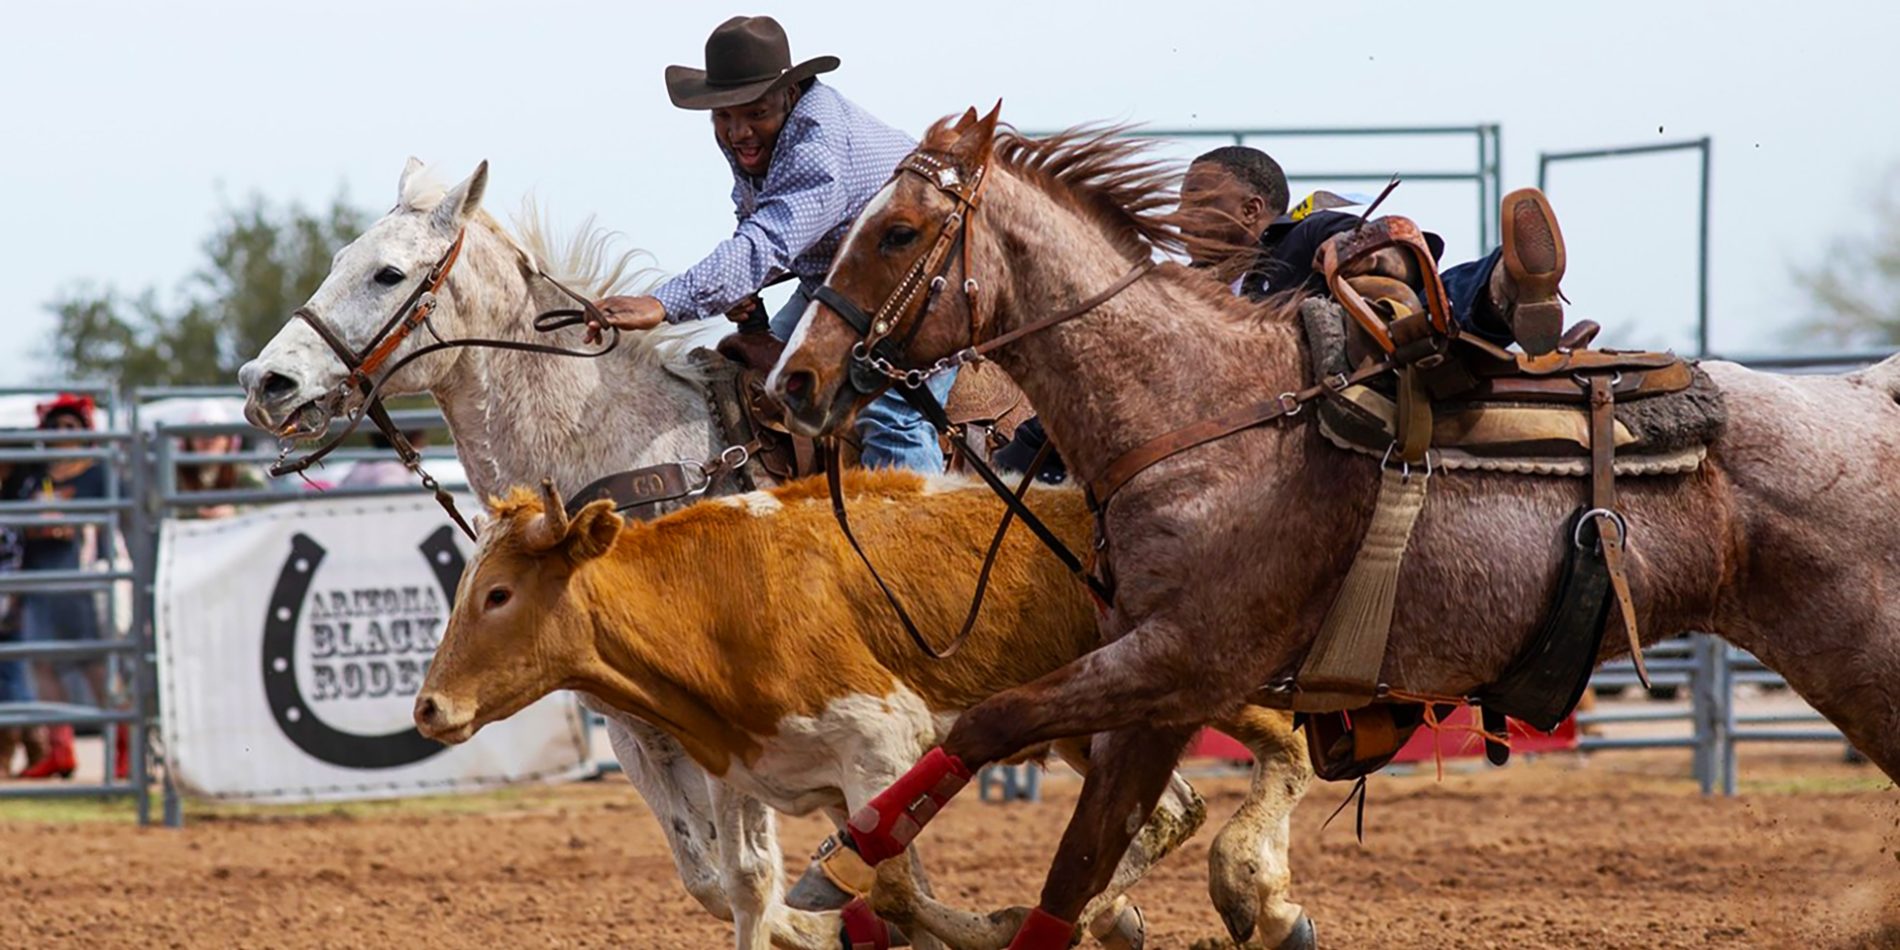 Unbridled Spirits A Thrilling Experience at the Arizona Black Rodeo